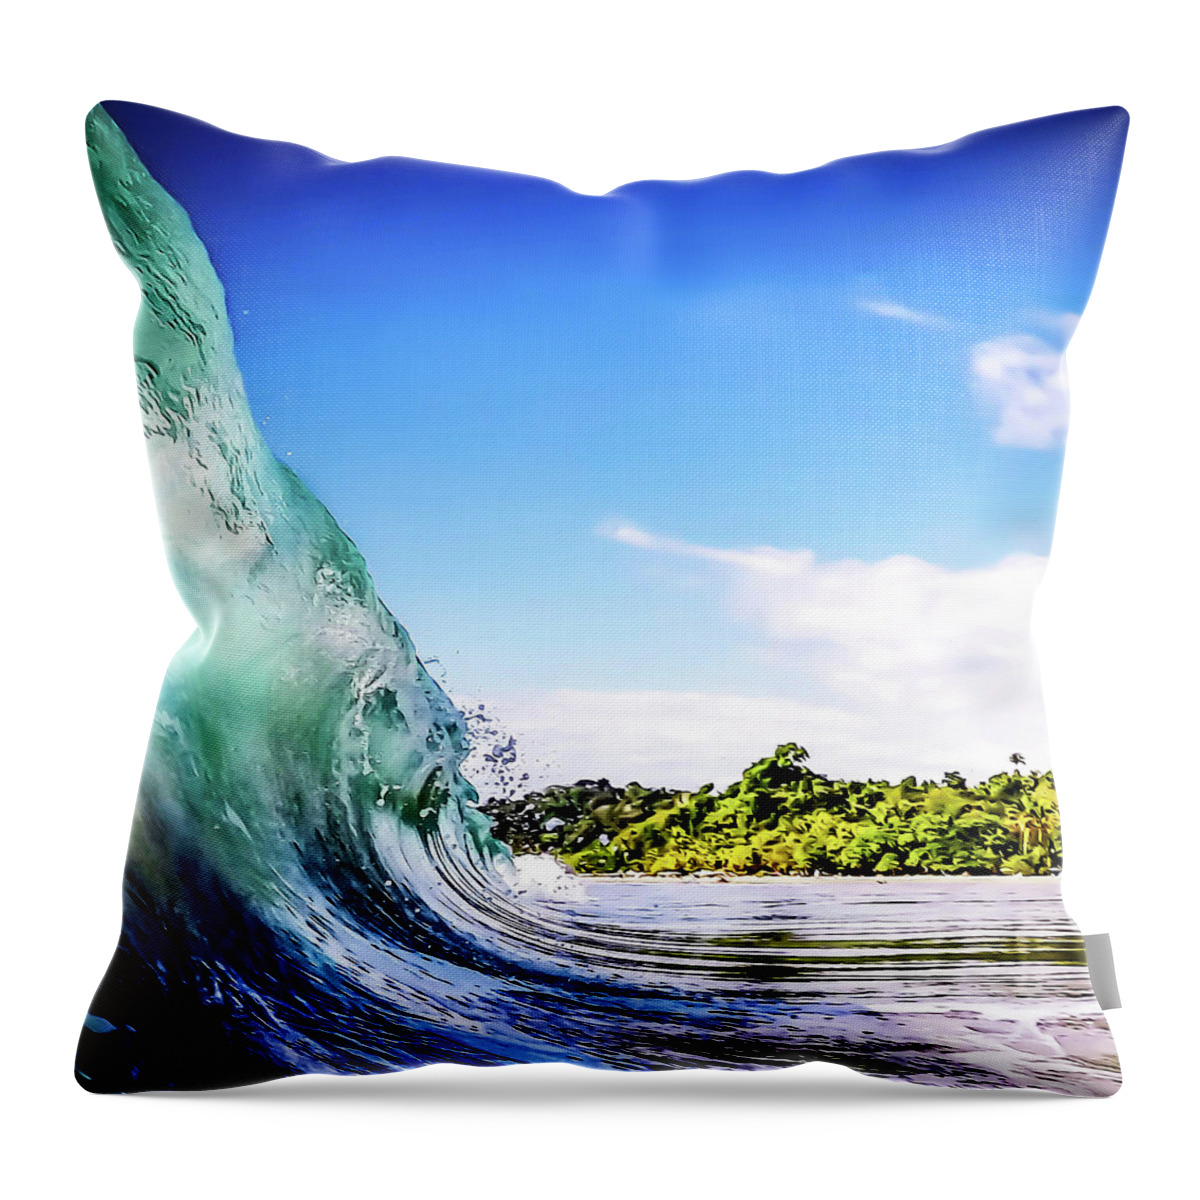 Wave Throw Pillow featuring the photograph Tropical Wave by Nicklas Gustafsson